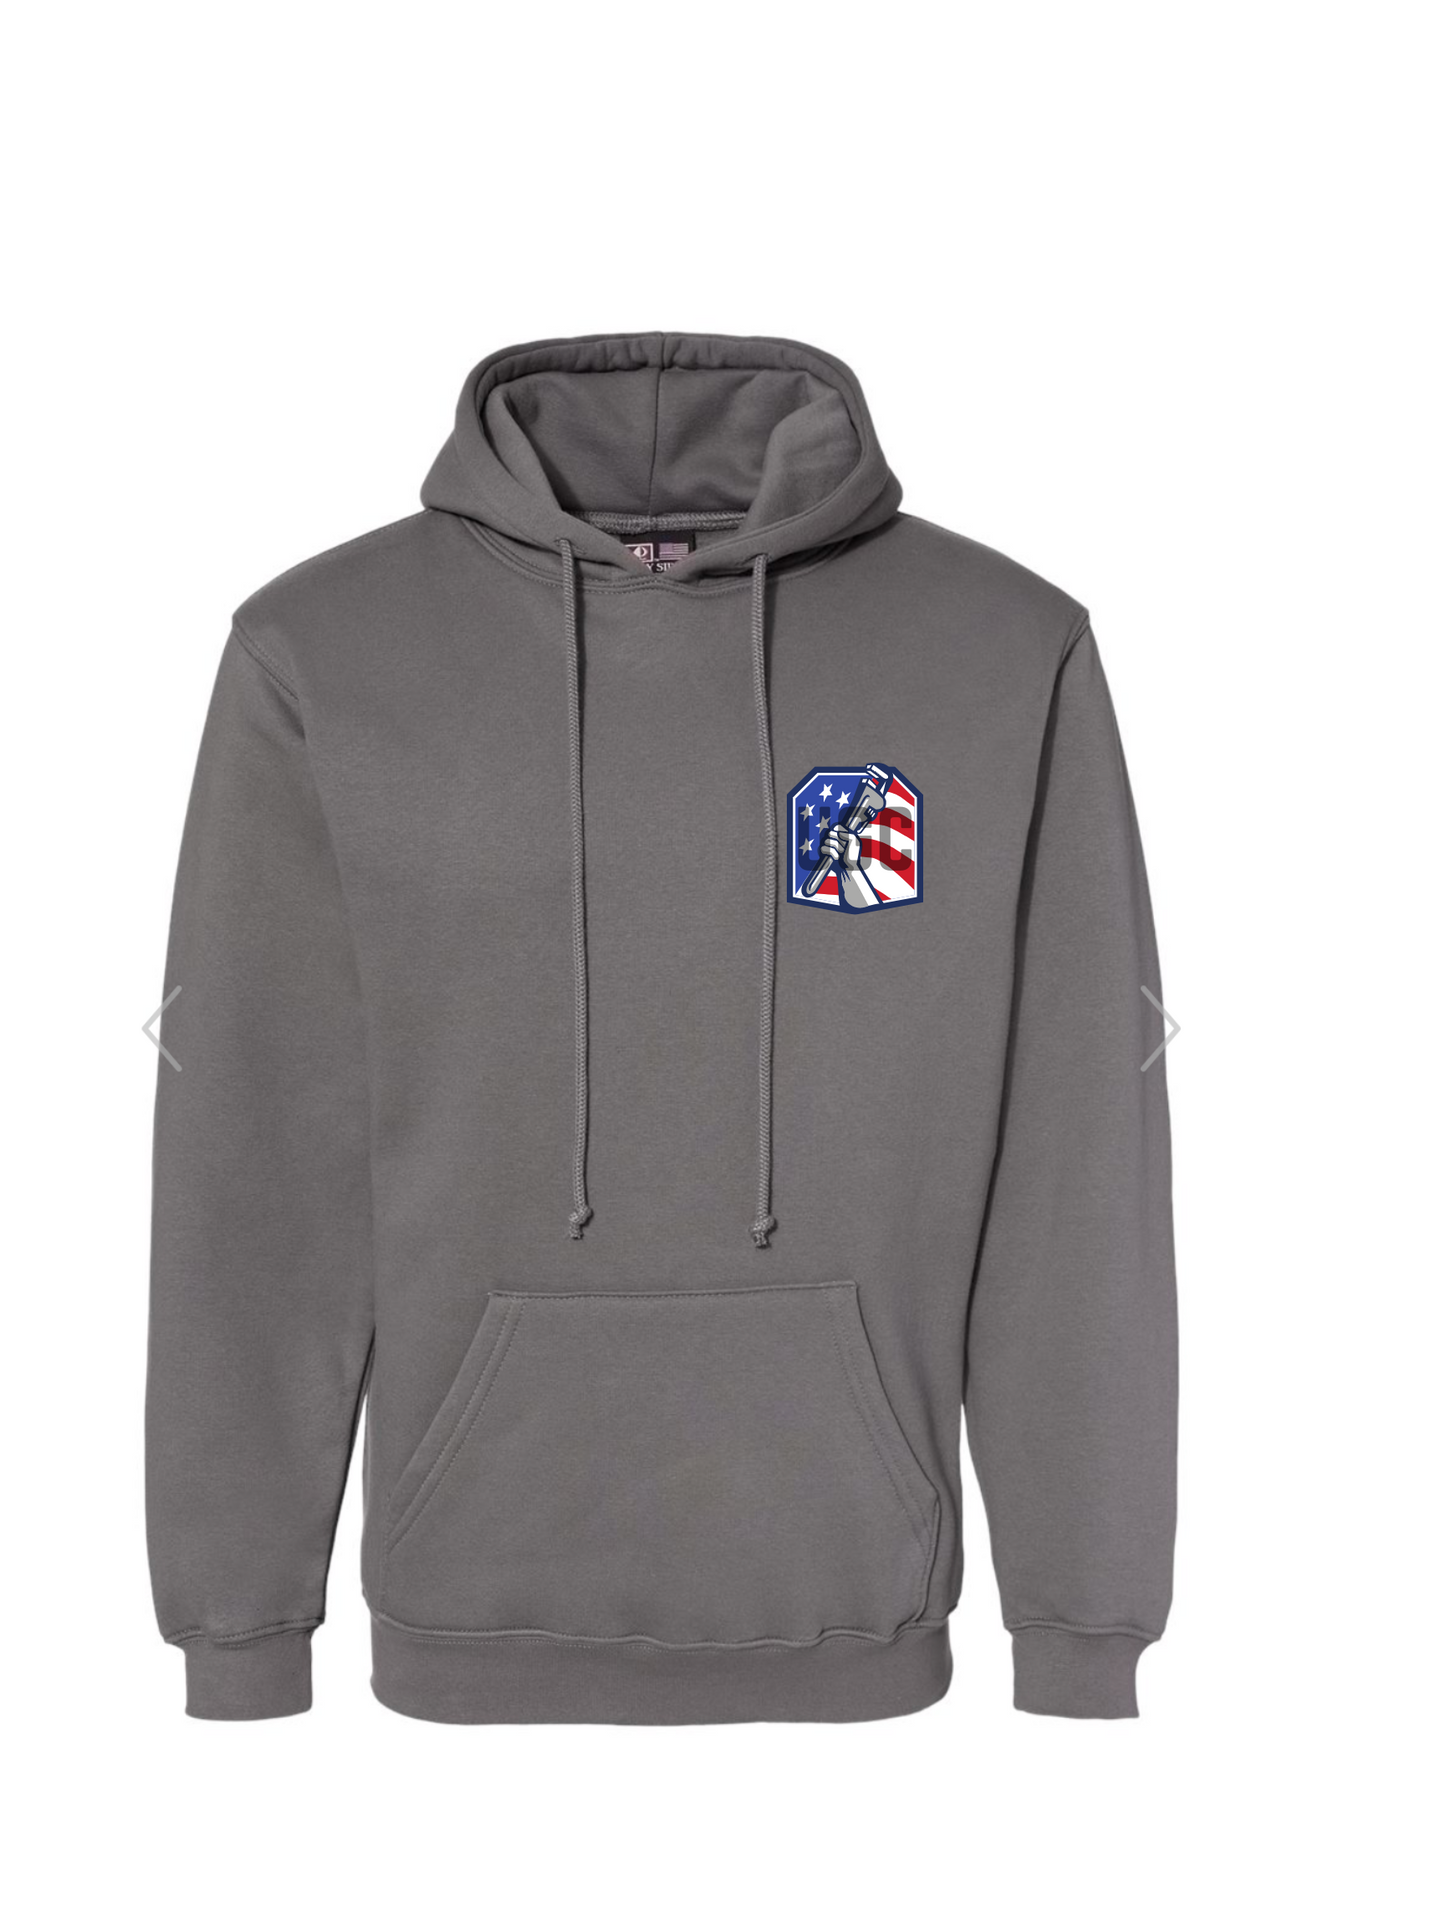 STARS AND STRIPES PIPE WRENCH HOODIE